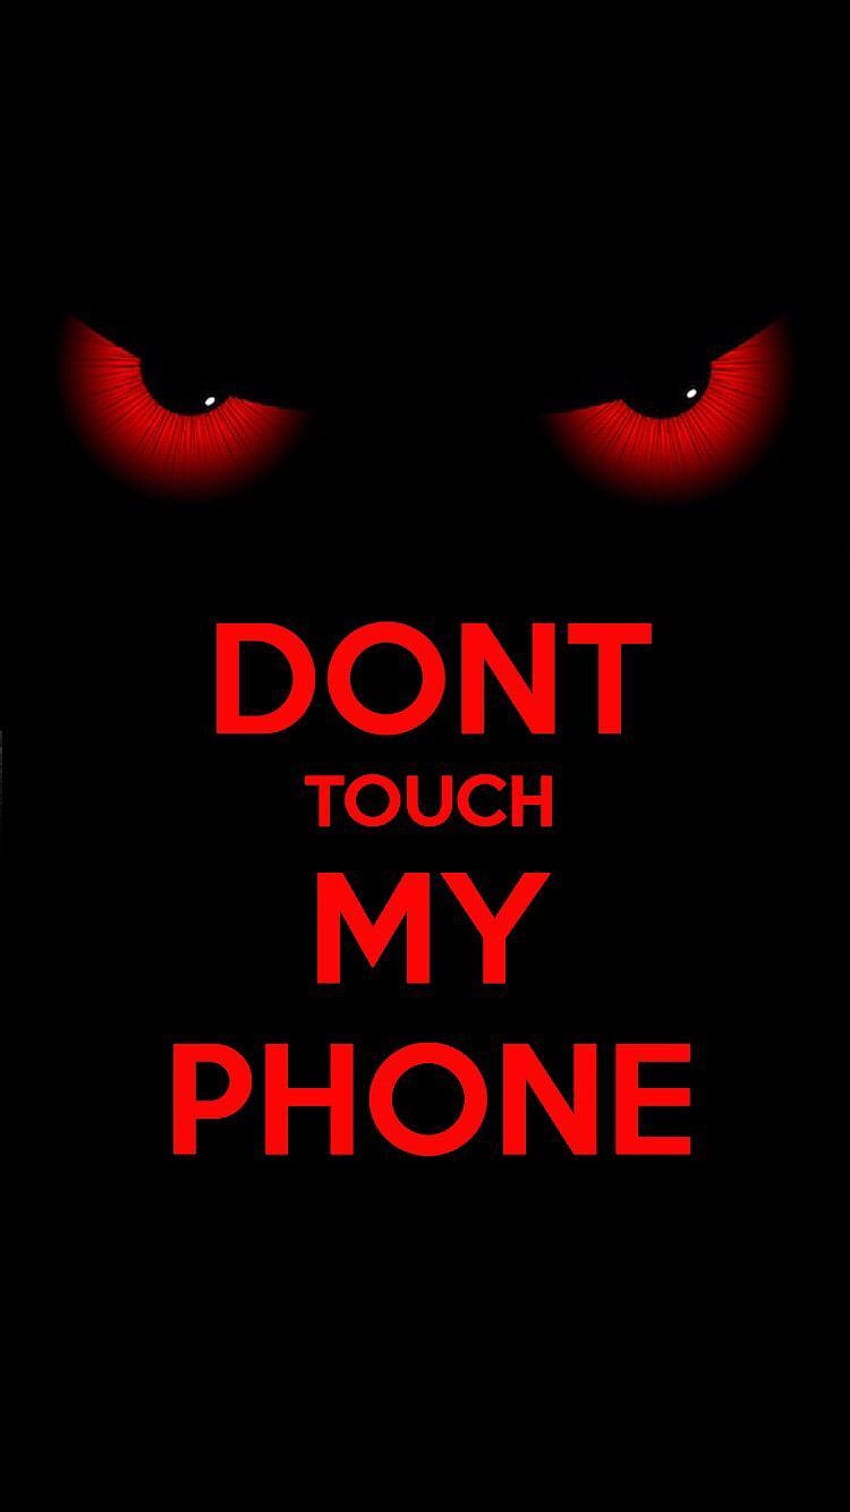 Android Phone Don T Touch Me Phone。 3D、触らないで HD電話の壁紙